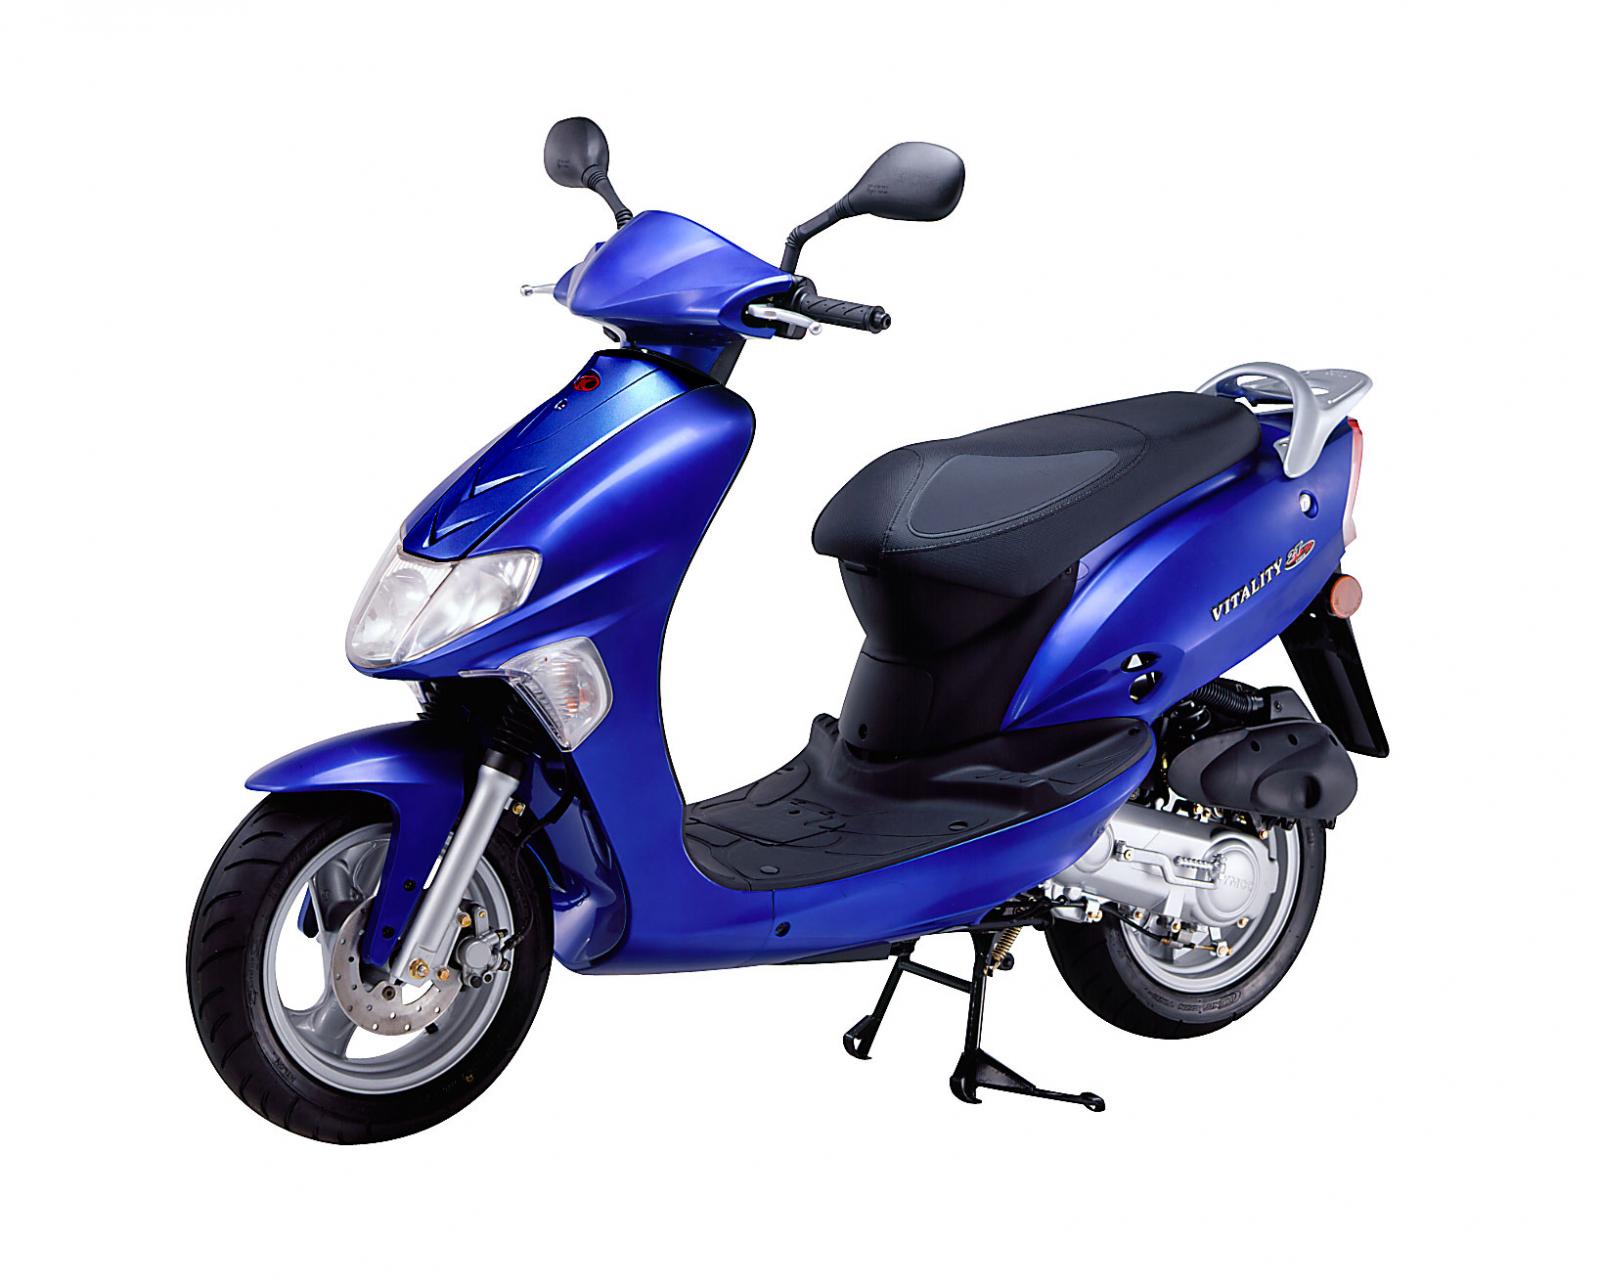 Kymco Filly 50 LX Photos, Informations, Articles - Bikes ...